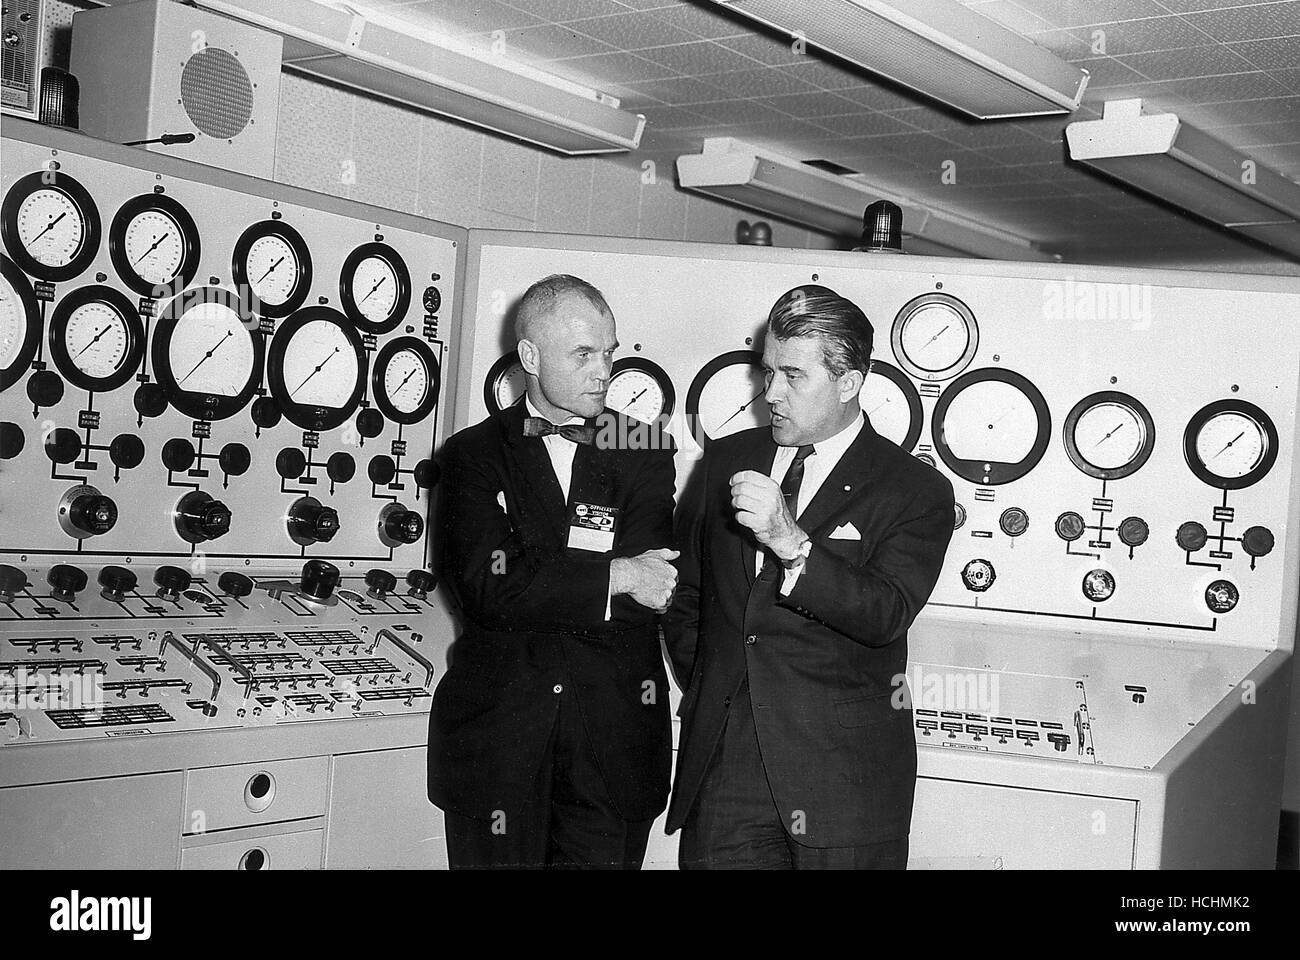 Dr. Wernher von Braun, right, briefs Astronaut John Glenn, left, in the control room of the Vehicle Test Section, Quality Assurance Division, Marshall Space Flight Center (MSFC) in Huntsville, Alabama, November 28, 1962.Credit: NASA via CNP /MediaPunch Stock Photo